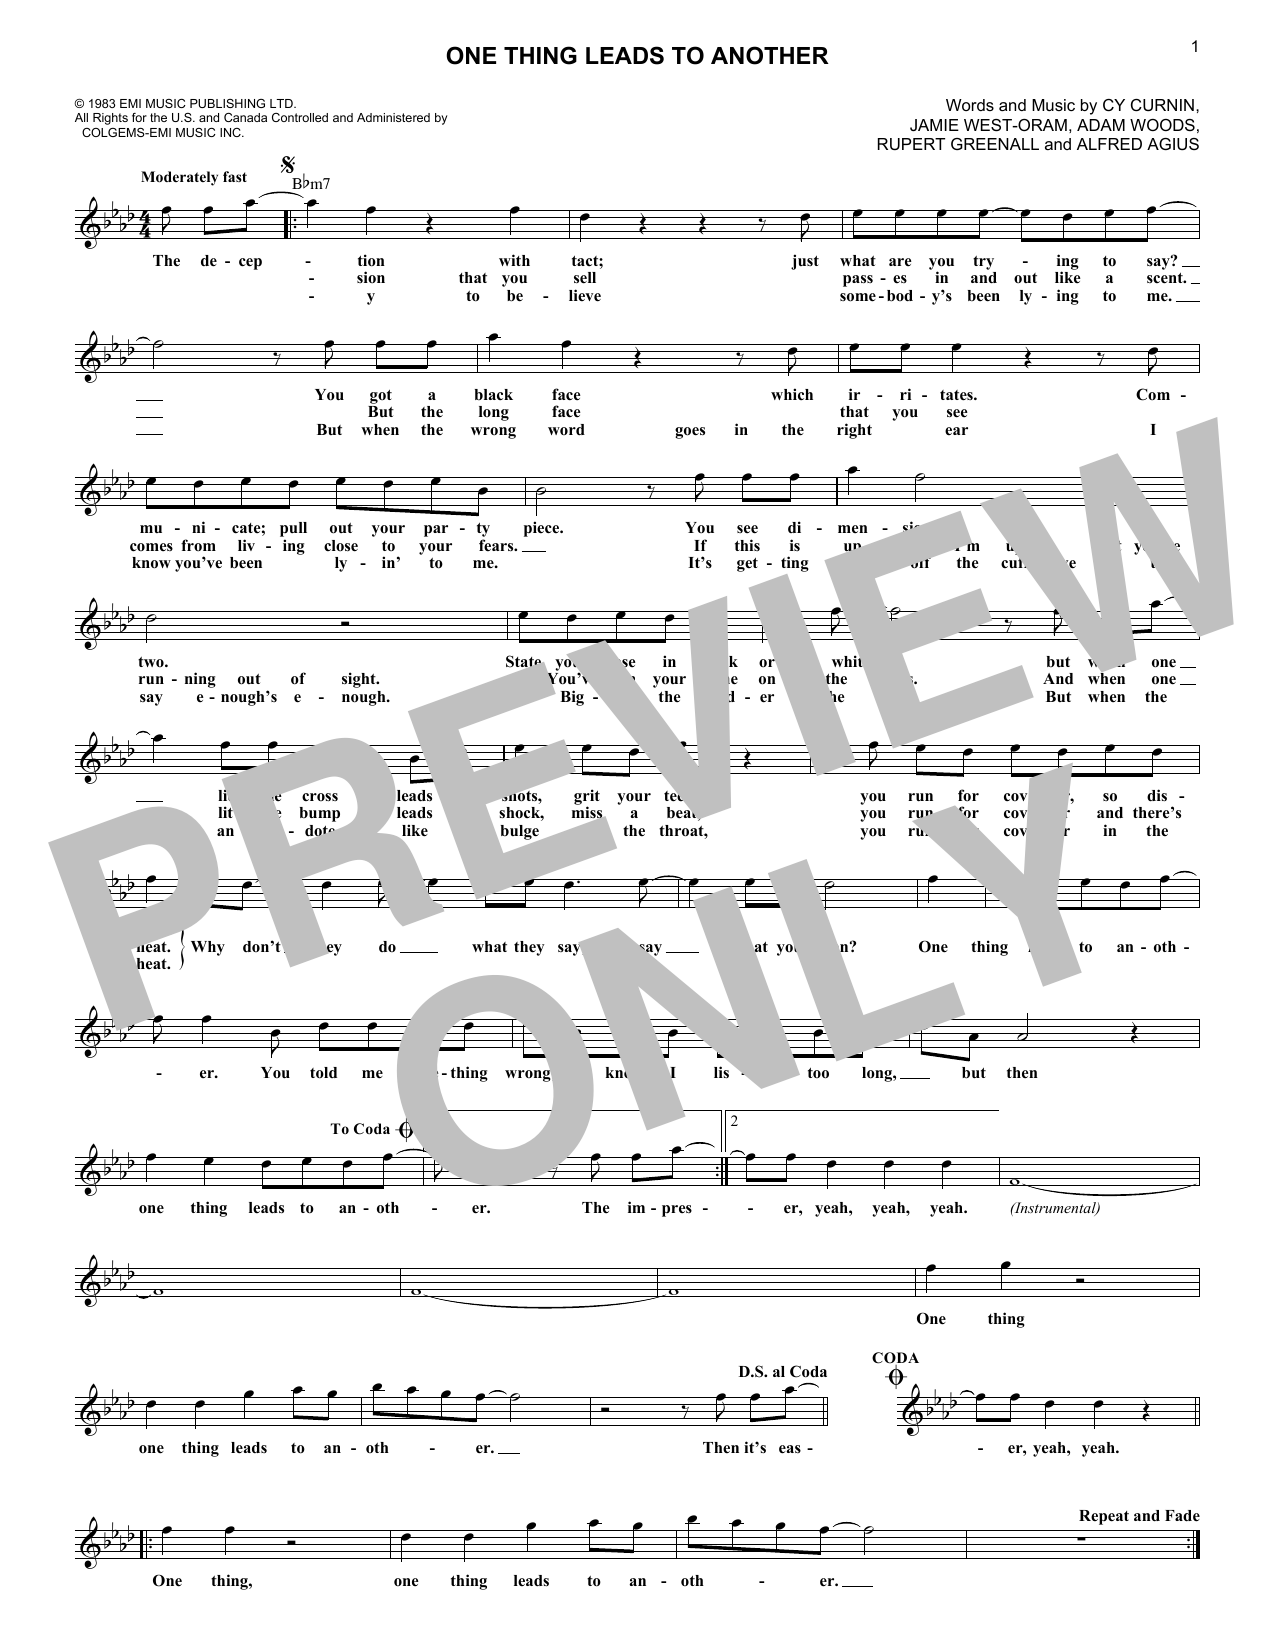 Download The Fixx One Thing Leads To Another Sheet Music